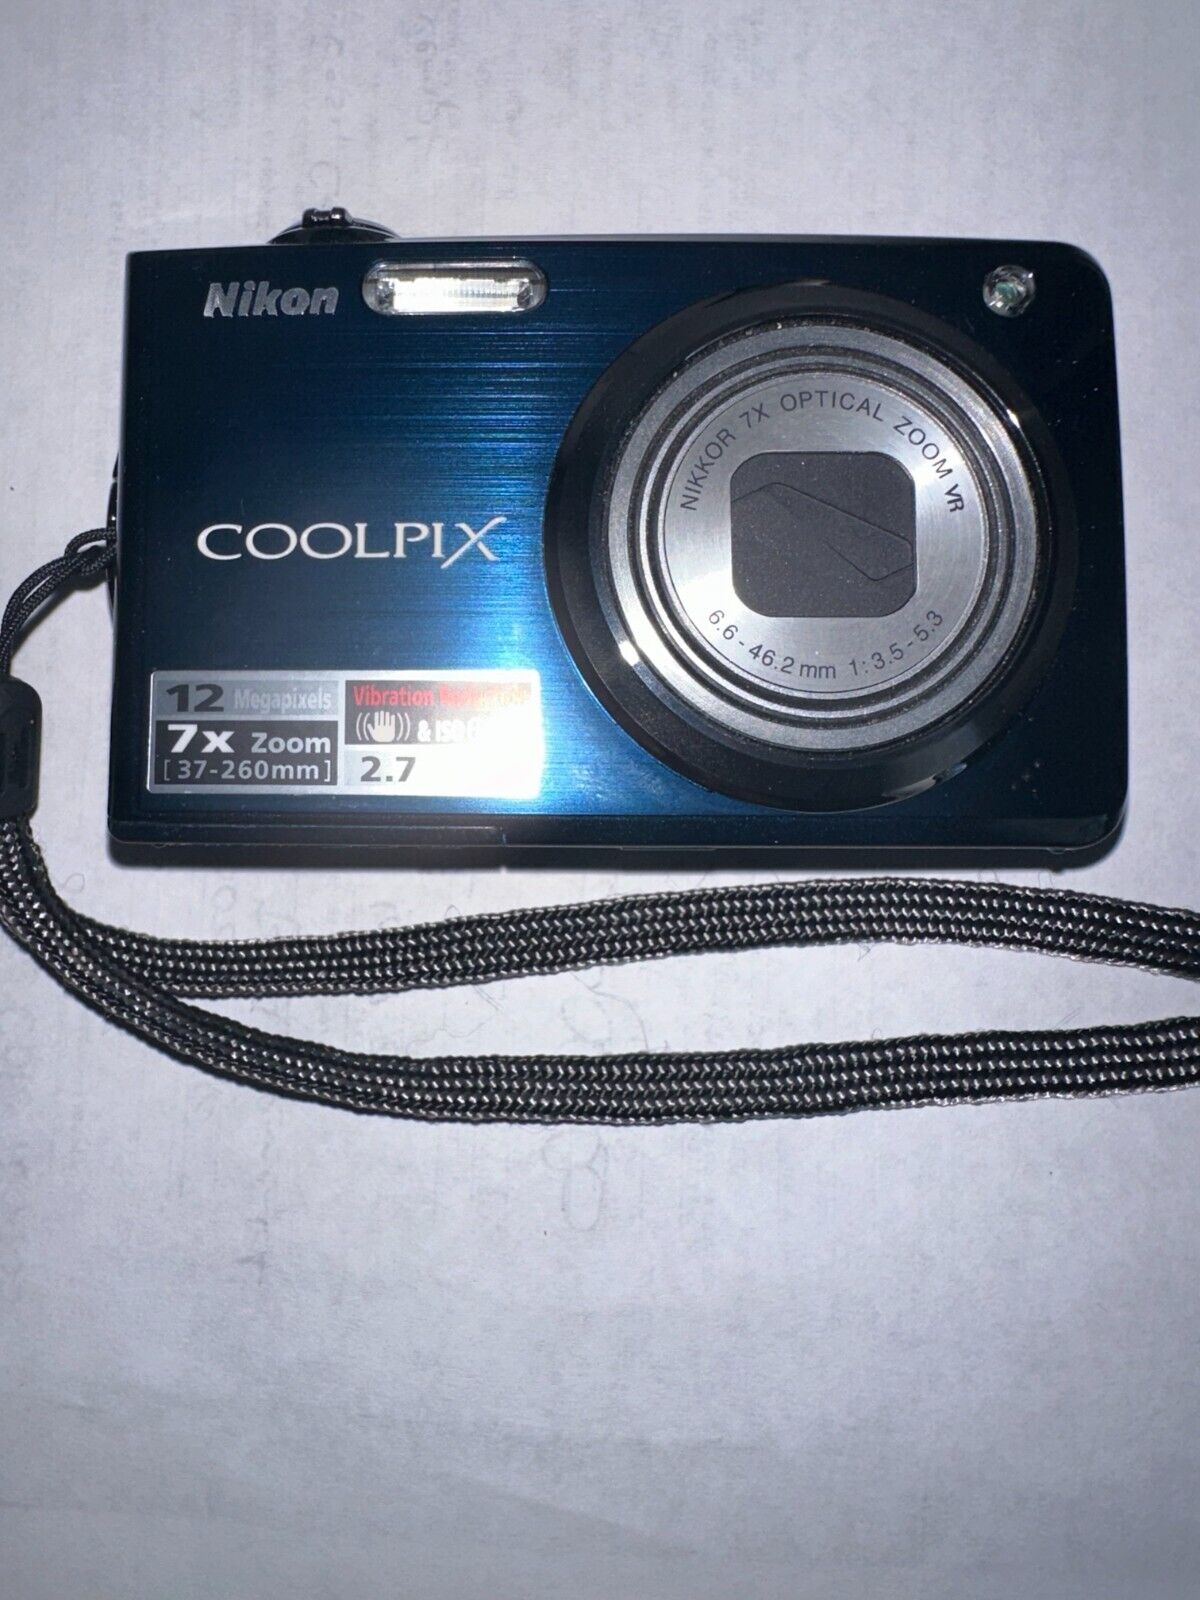 Nikon COOLPIX S630 12.0 MP Digital Camera - Navy Blue. ONLY THE CAMERA TESTED